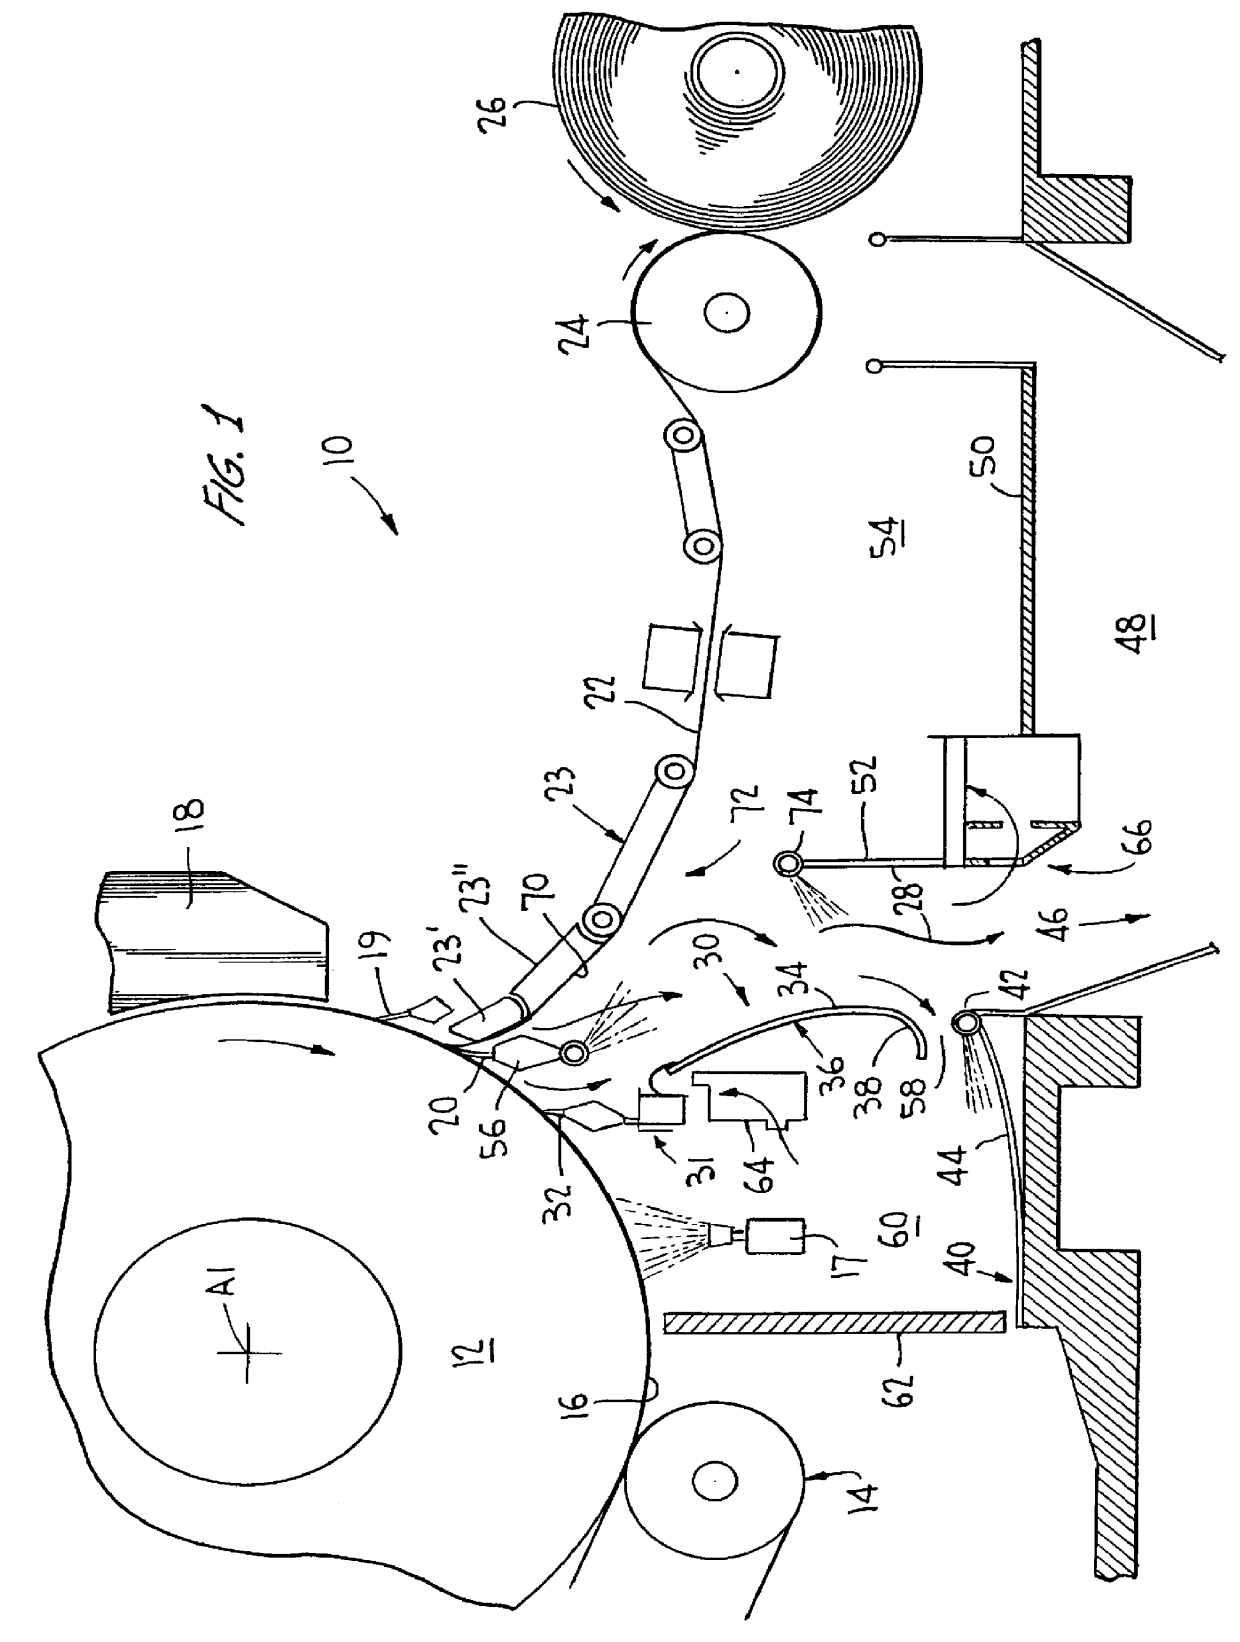 Dust-controlling apparatus, with a water curtain device, for a paper manufacturing machine